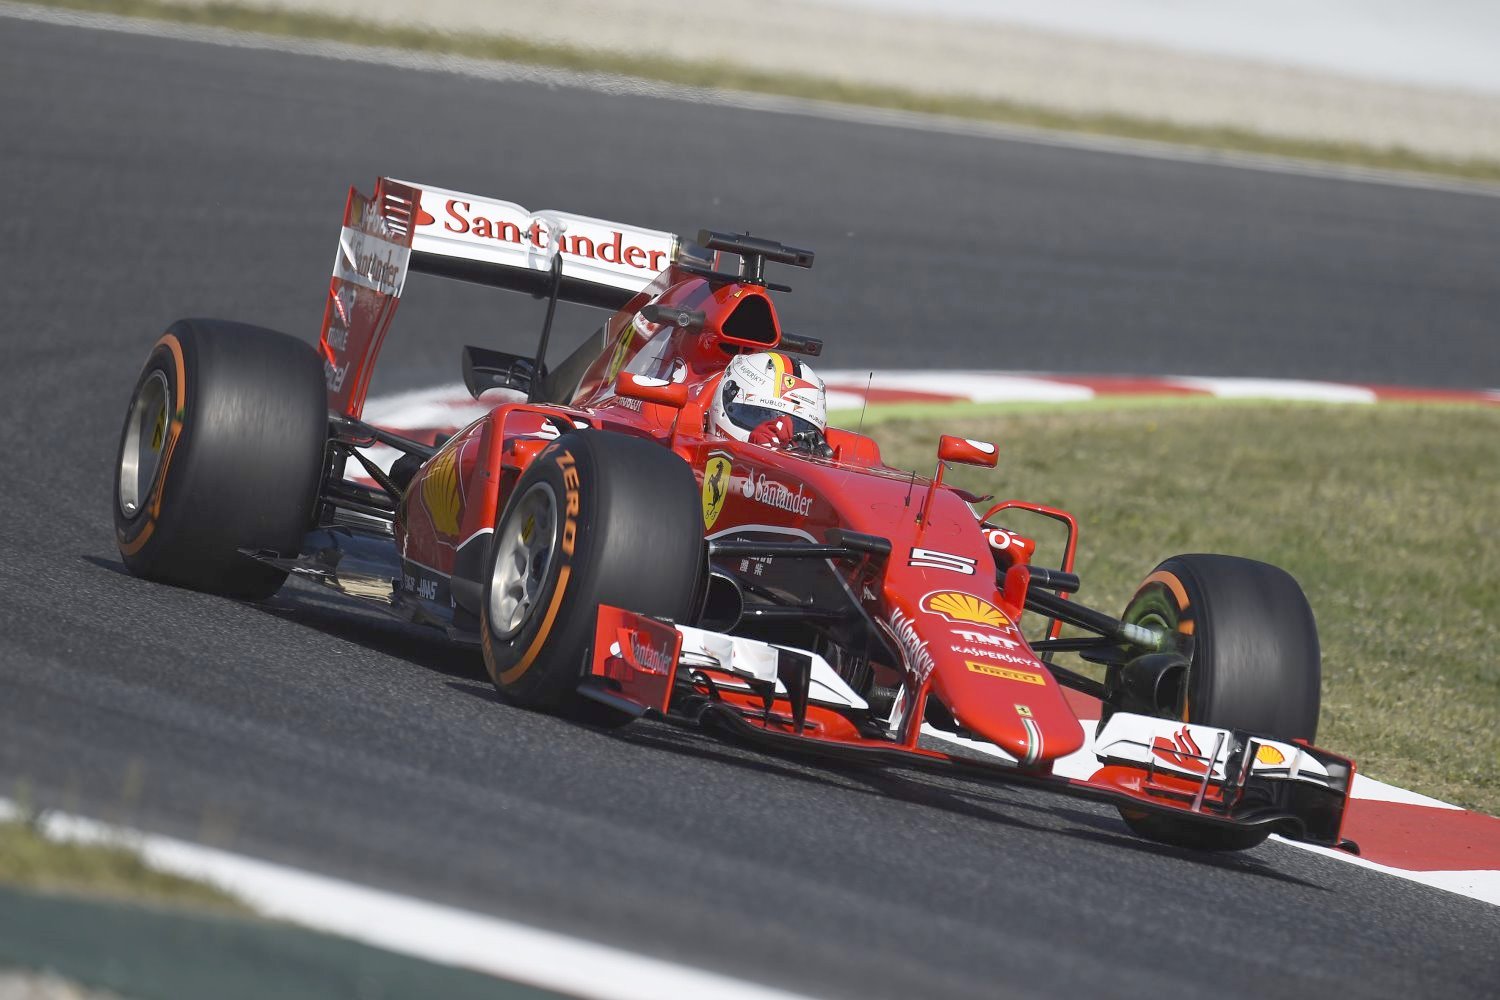 Ferrari brought out upgrades in SPain but Mercedes has been sandbagging all year - holding back on upgrades until needed.  They rolled out even more upgrades in Spain than Ferrari did and smoked the Italian team